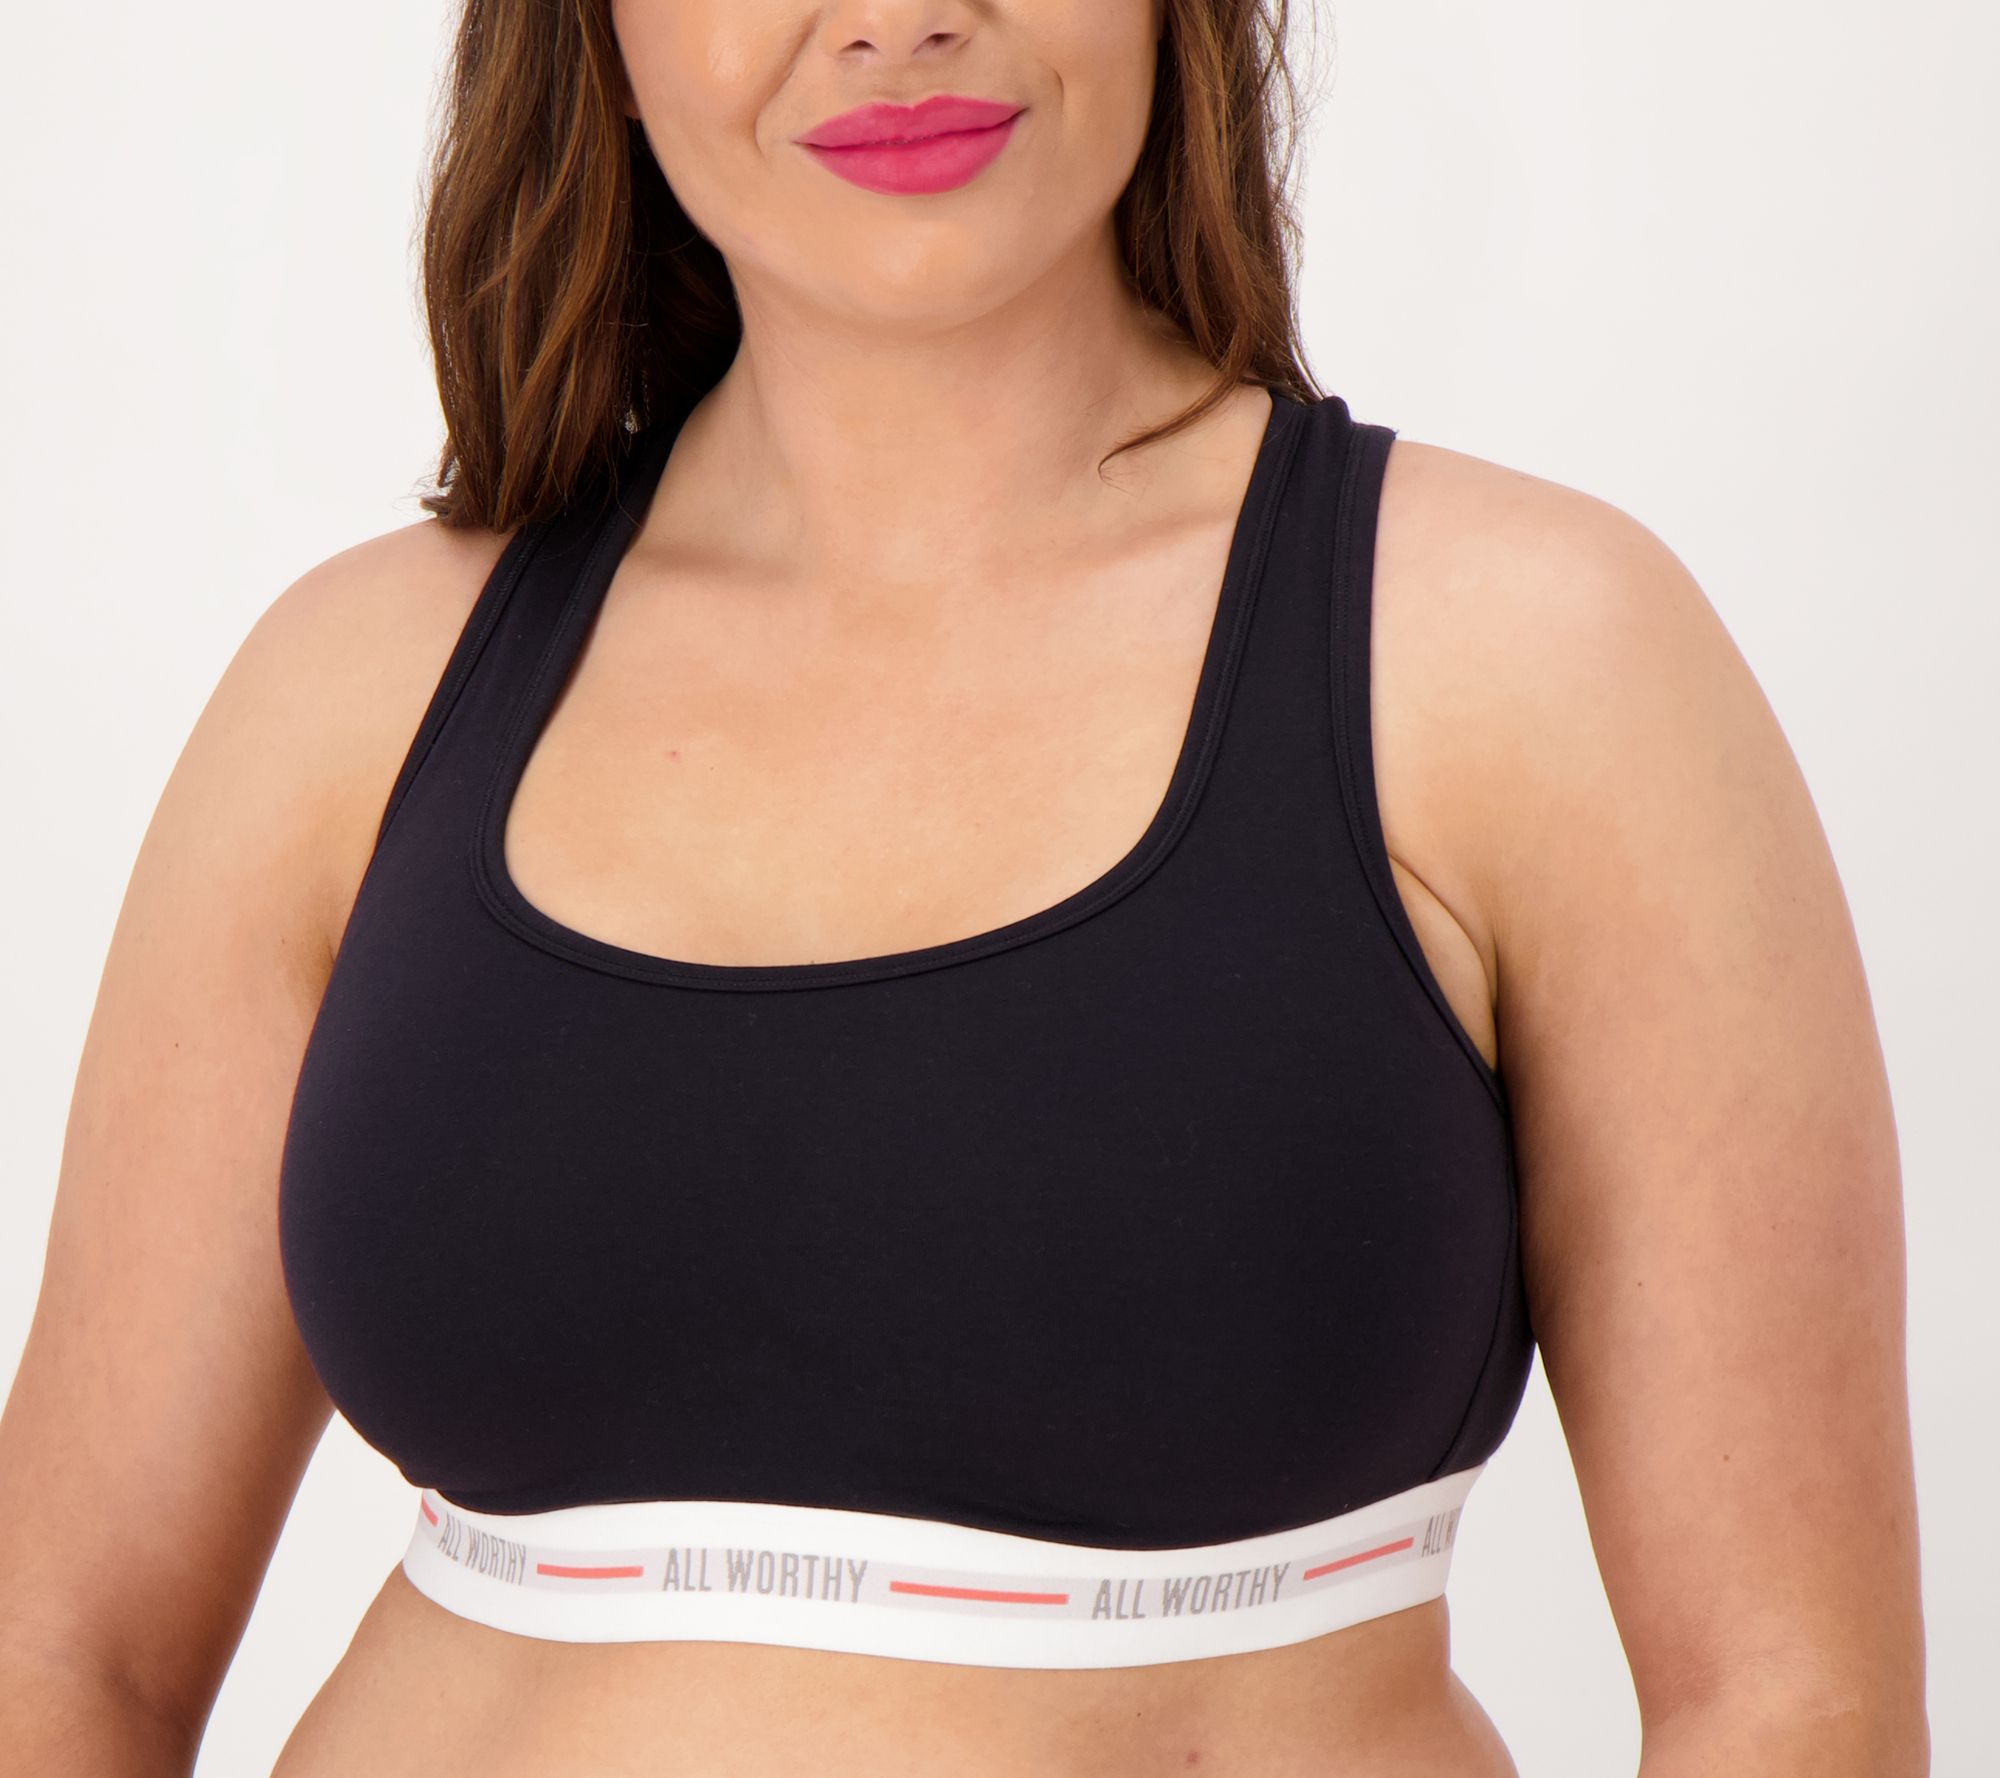 Mrat Clearance Plus Size Sports Bras for Women 3x-5x Clearance